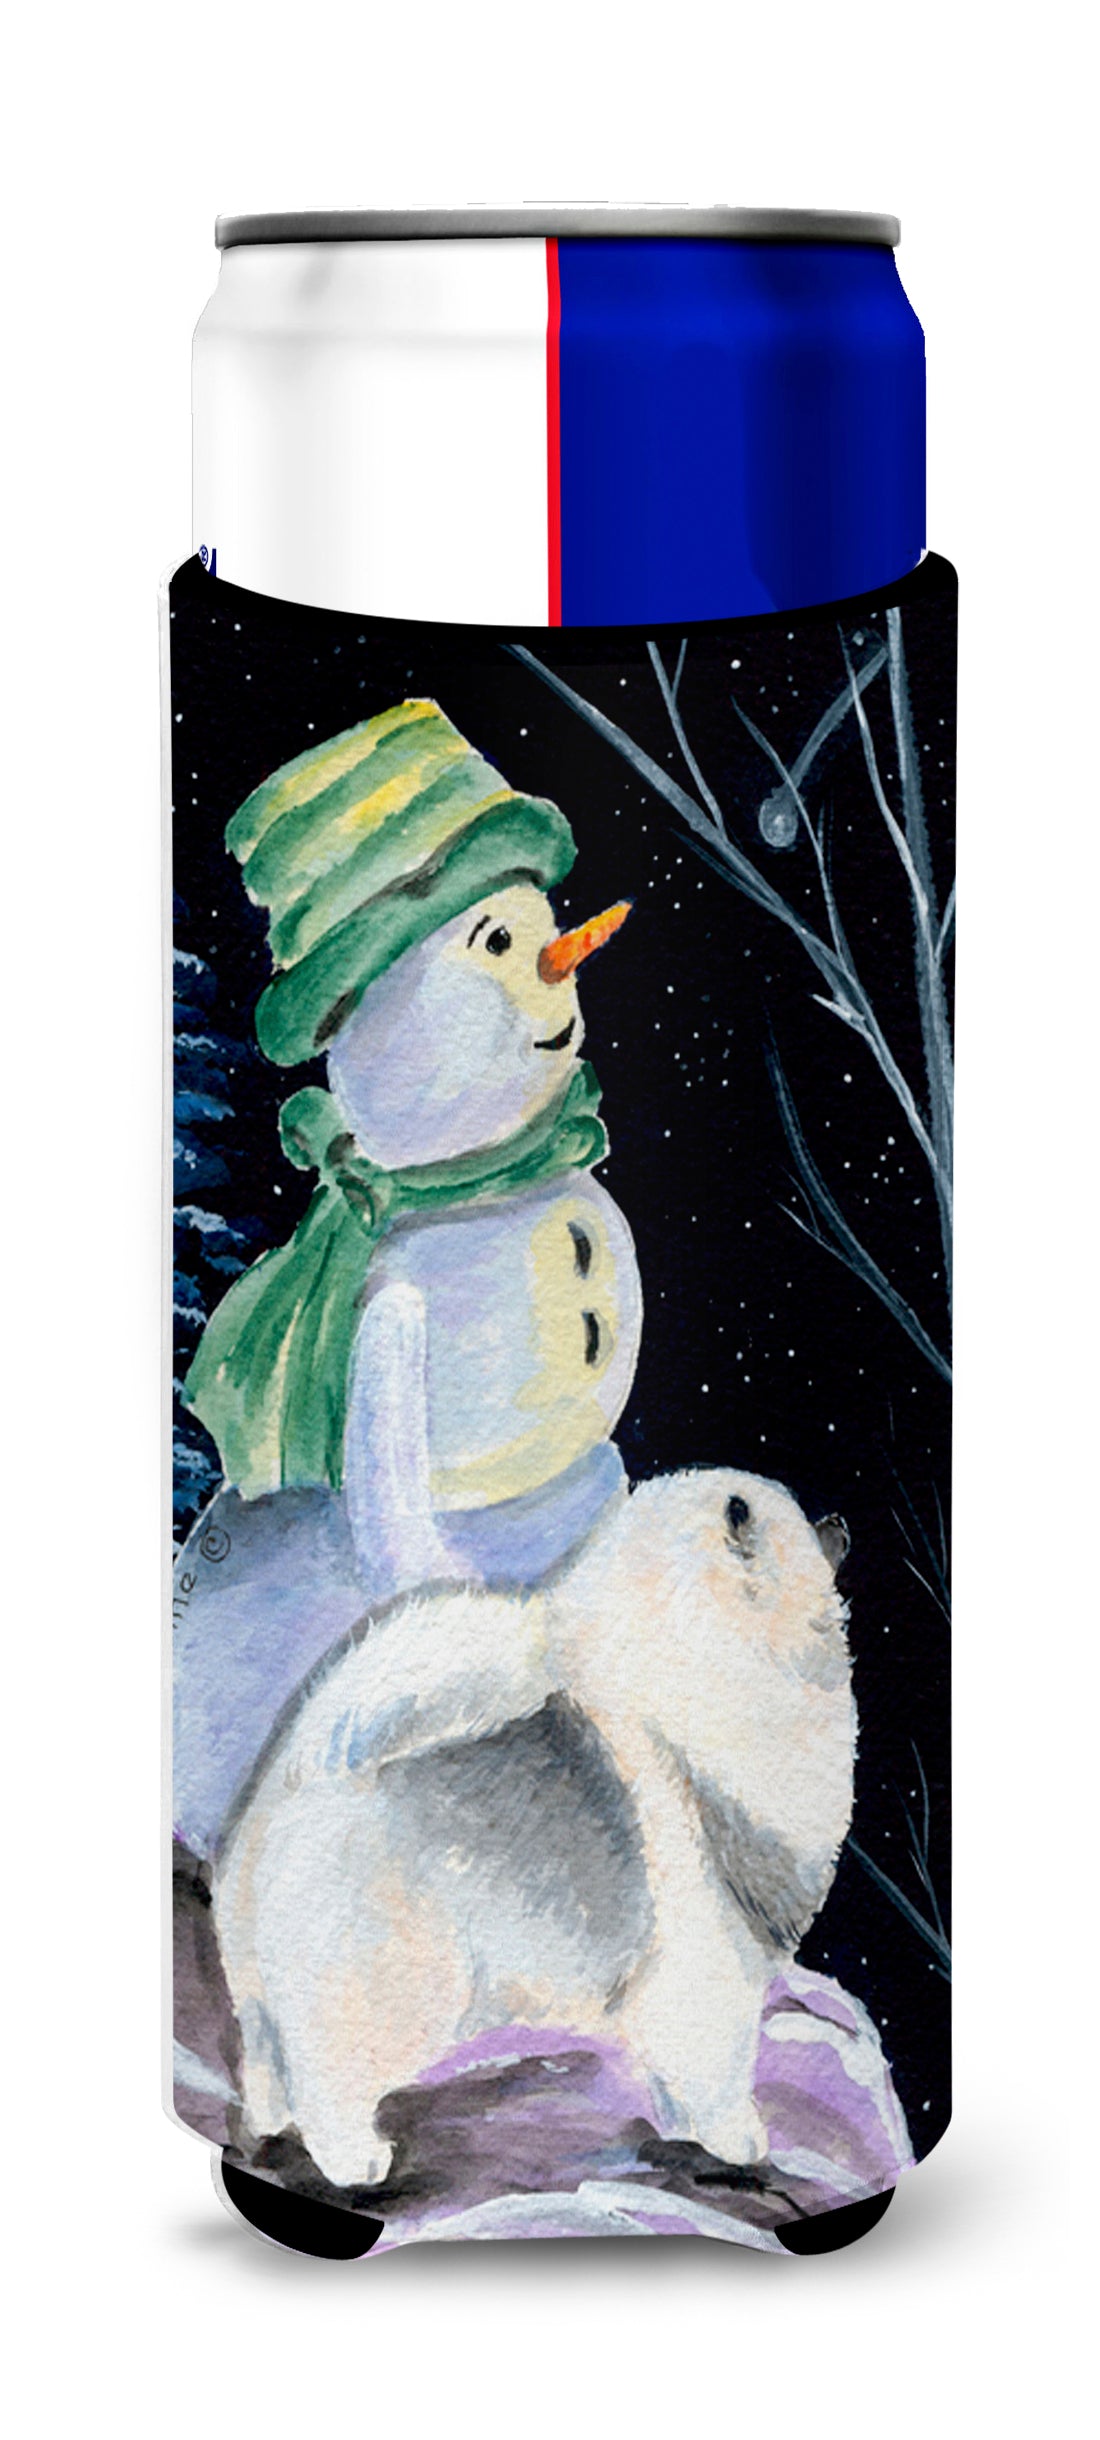 Snowman with Keeshond Ultra Beverage Insulators for slim cans SS8557MUK.